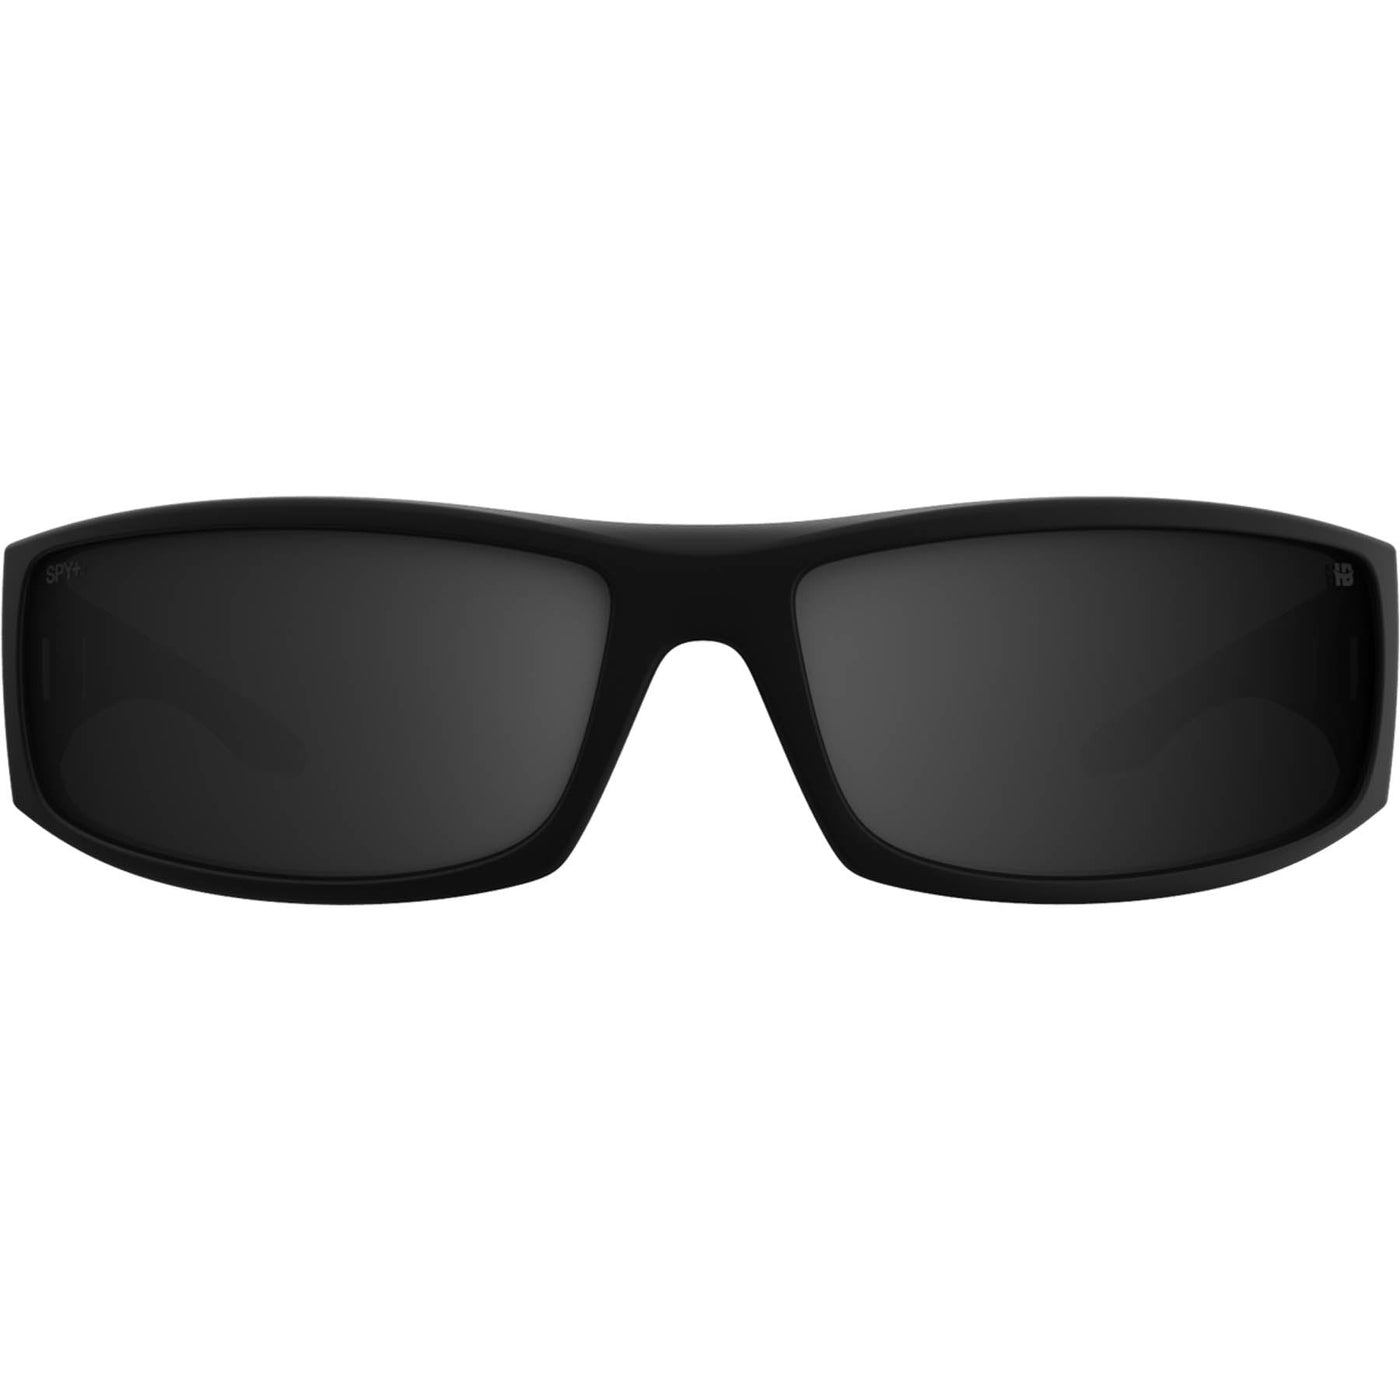 SPY COOPER Polarized Sunglasses, Happy BOOST - Black 8Lines Shop - Fast Shipping